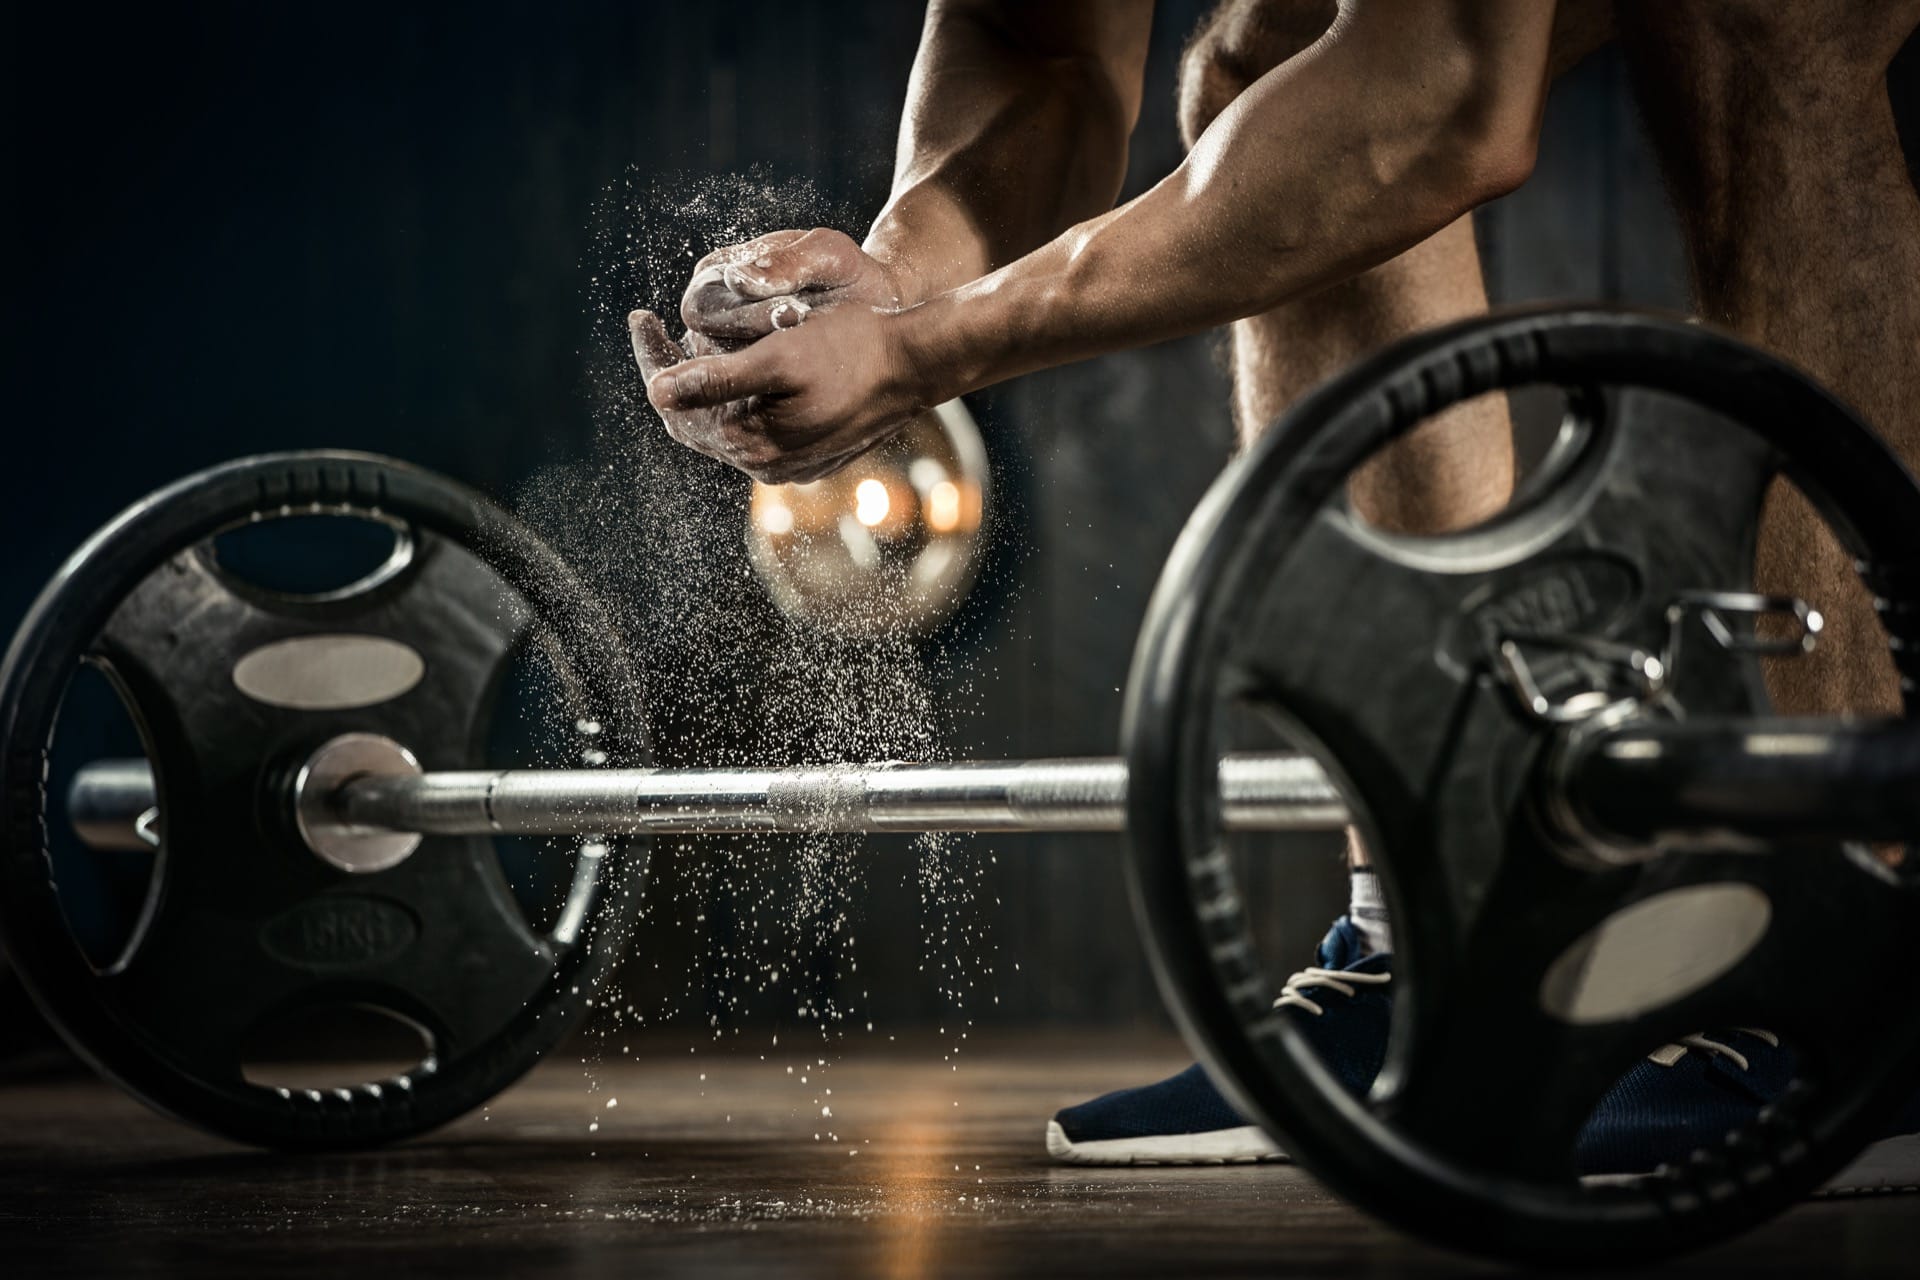 Why We Need to Lift Weights - Your Health